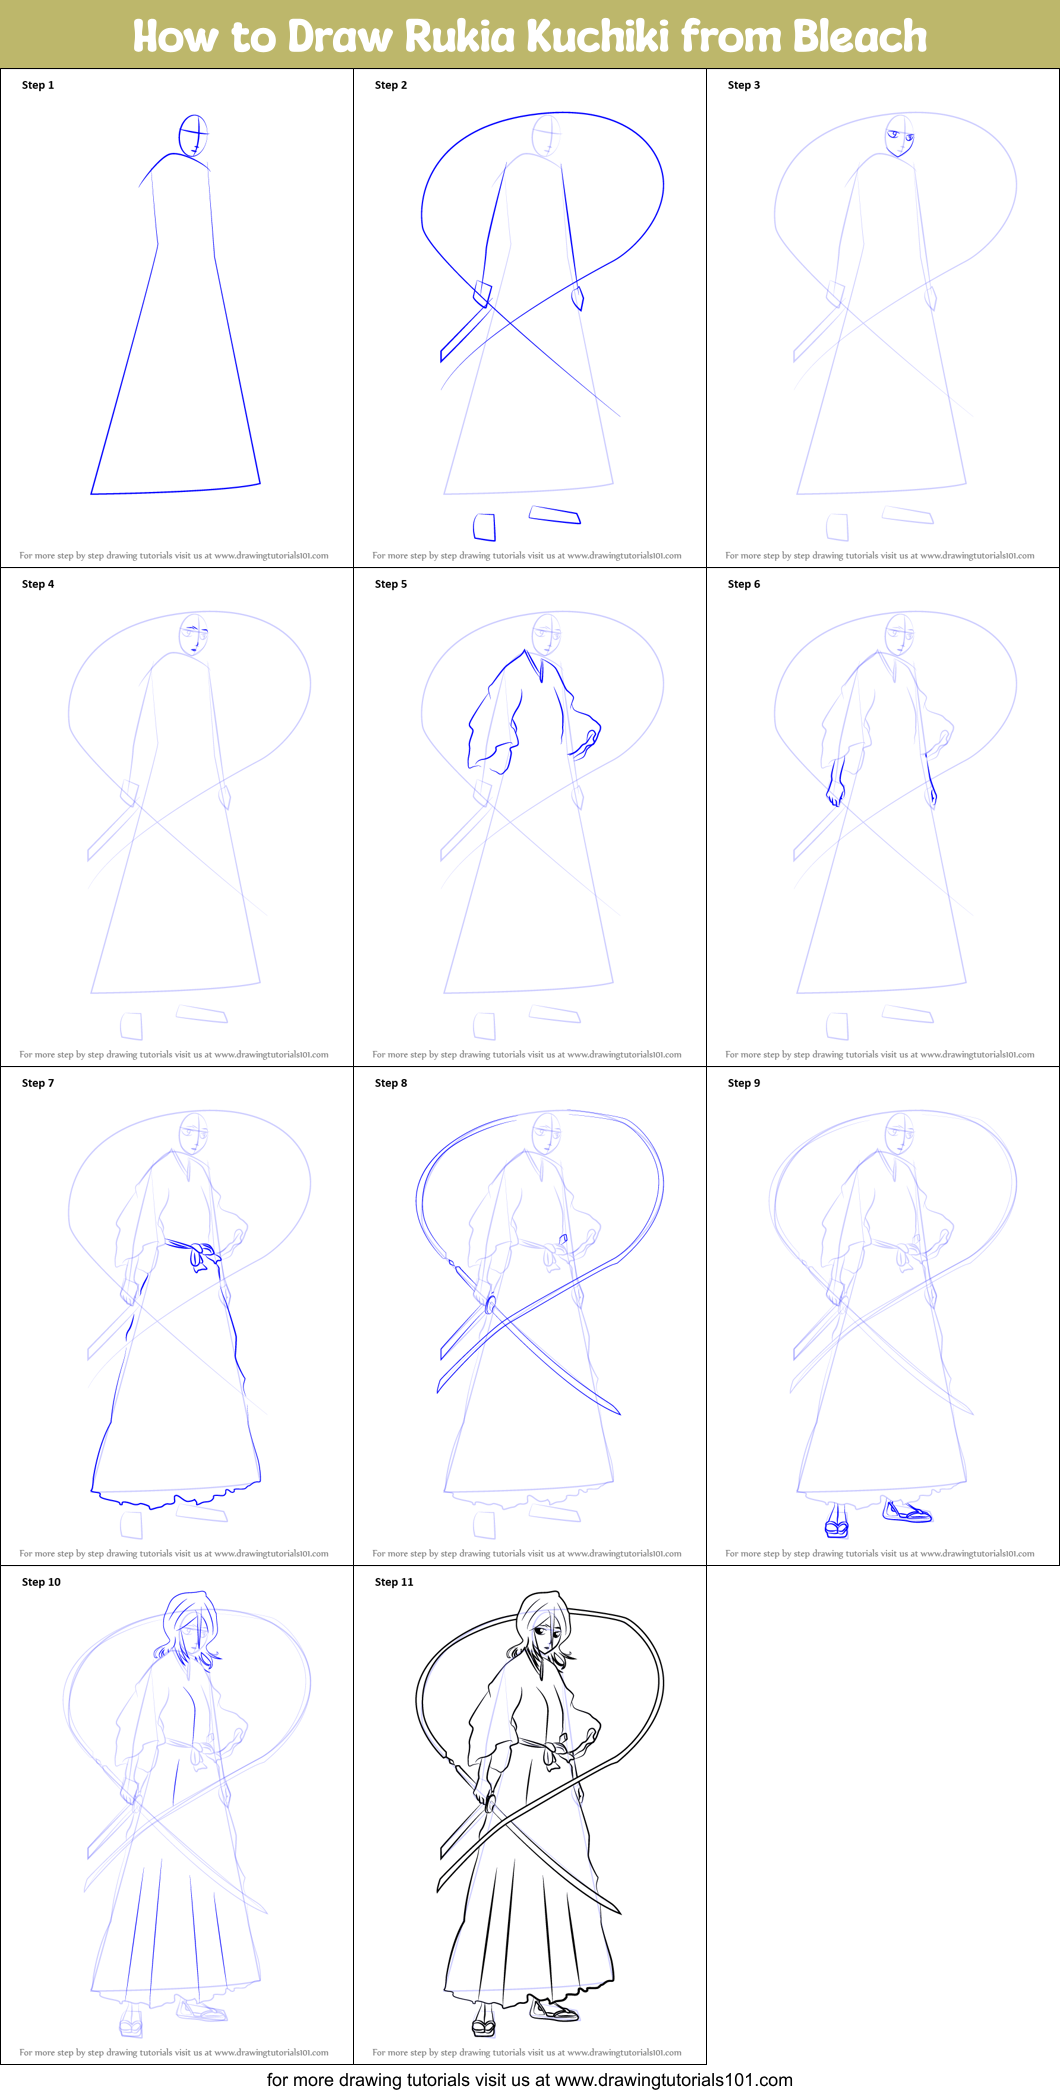 Download How to Draw Rukia Kuchiki from Bleach printable step by step drawing sheet : DrawingTutorials101.com